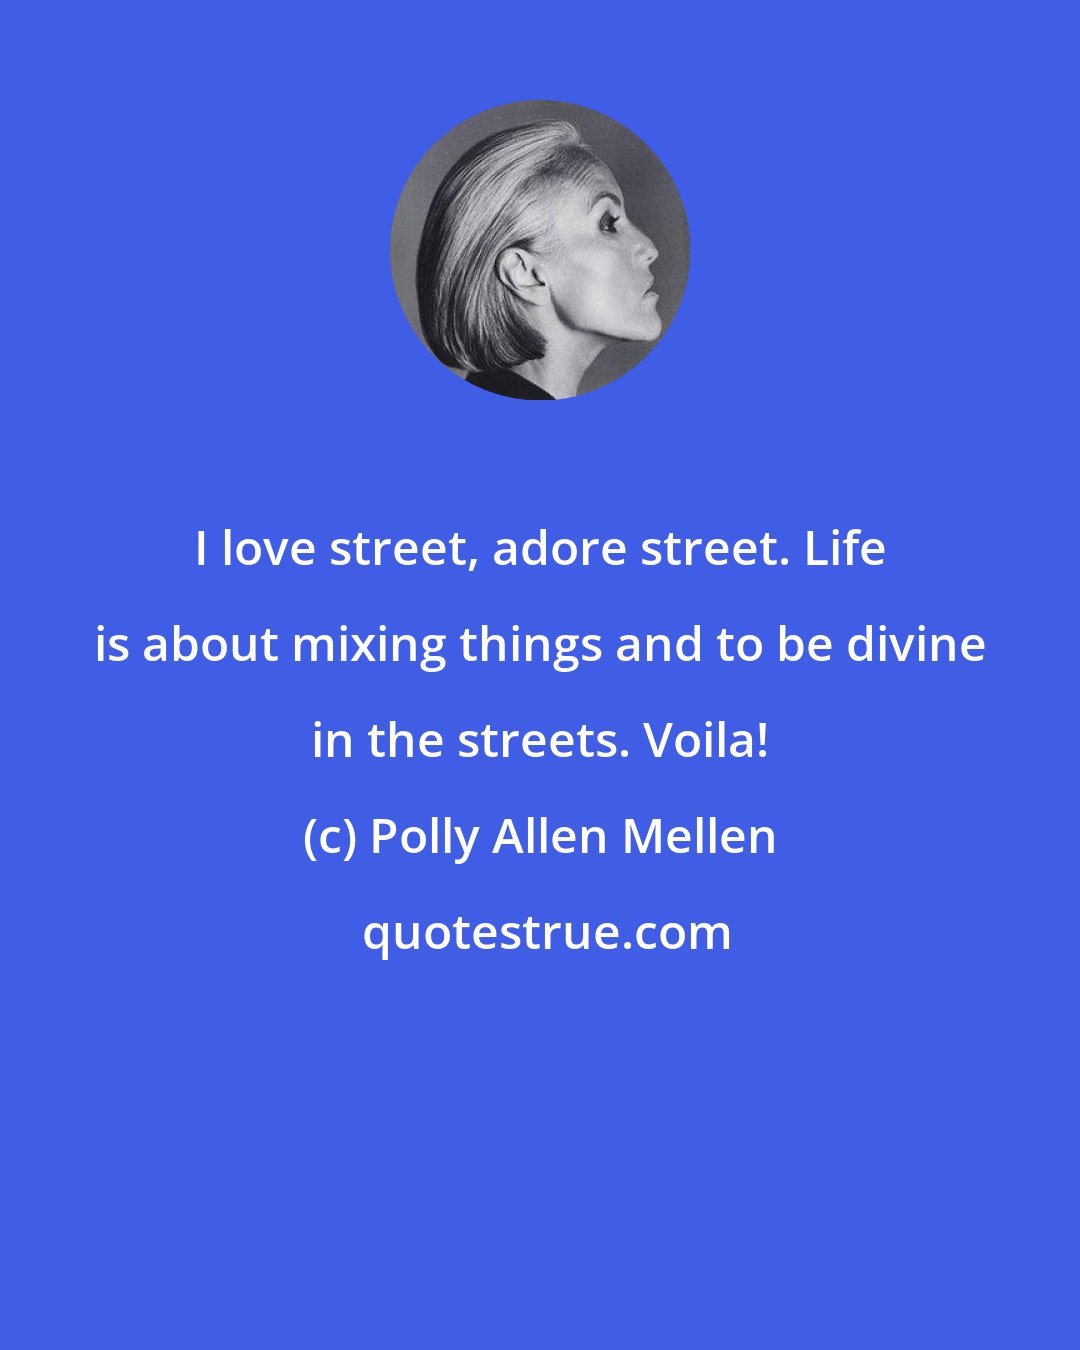 Polly Allen Mellen: I love street, adore street. Life is about mixing things and to be divine in the streets. Voila!